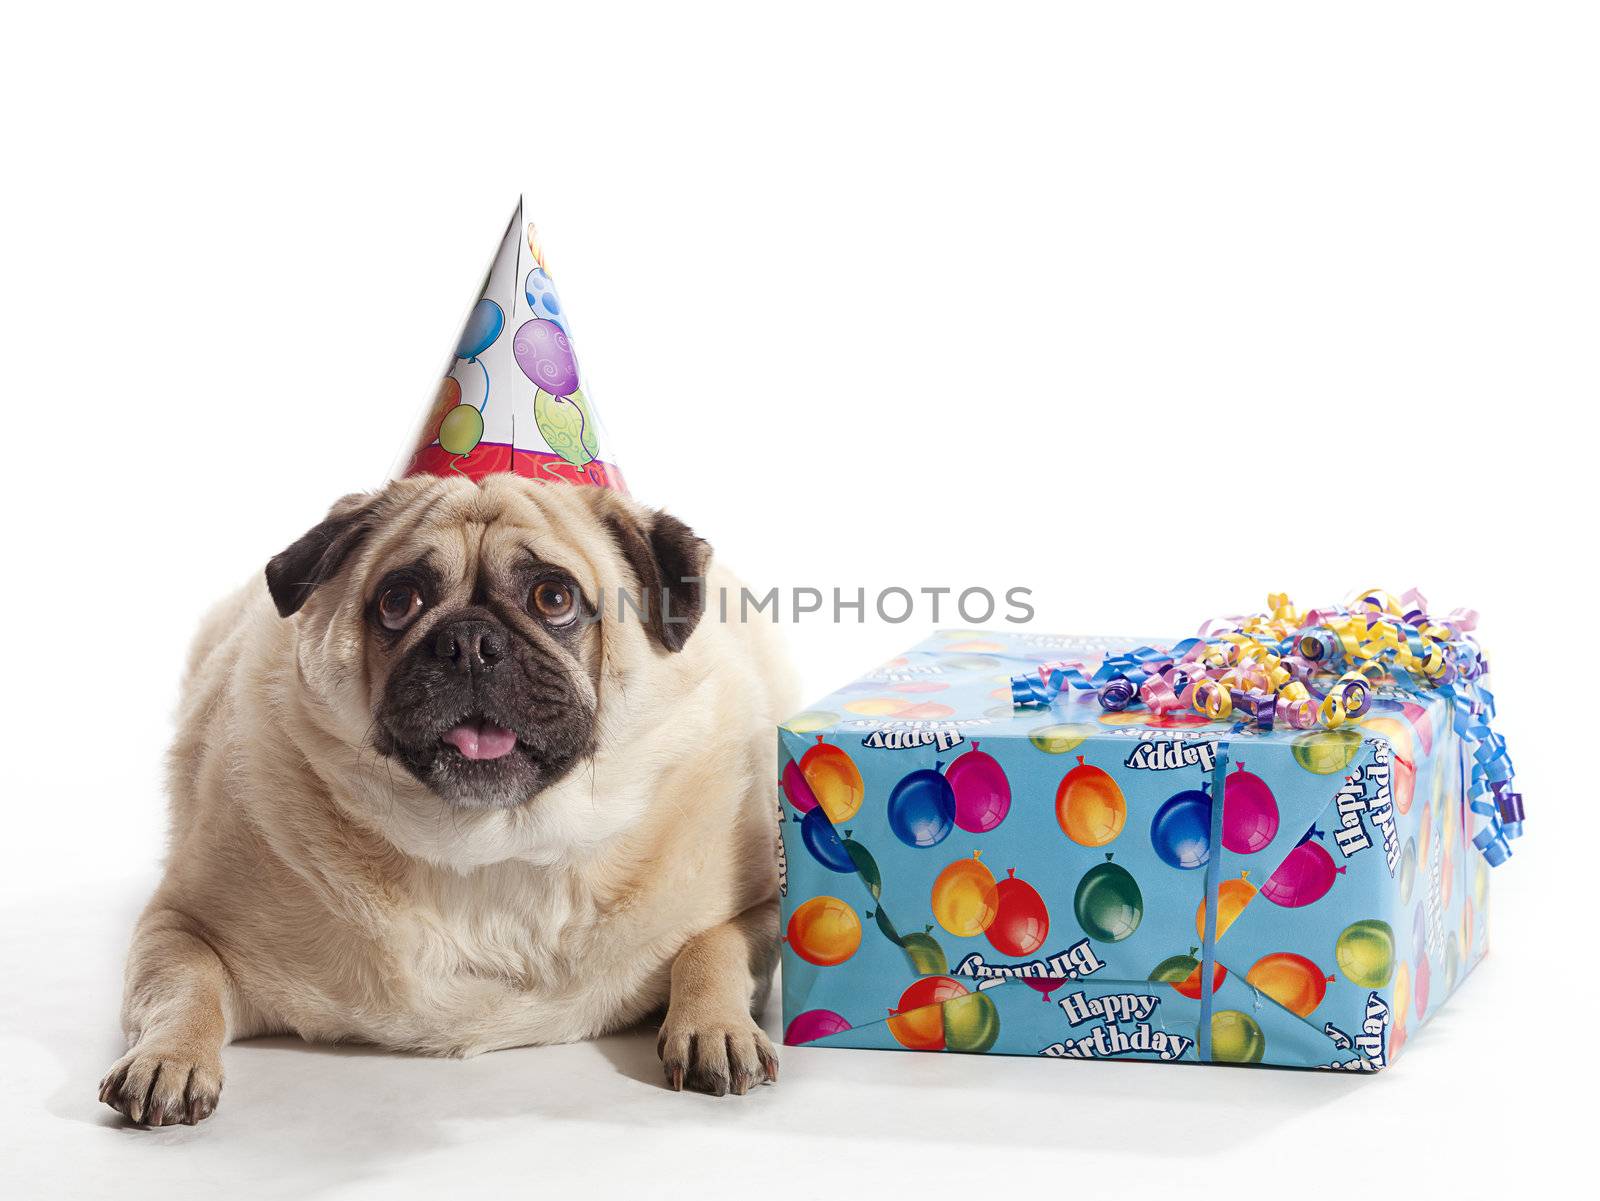 A Pug on a white background with a birthday present and hat